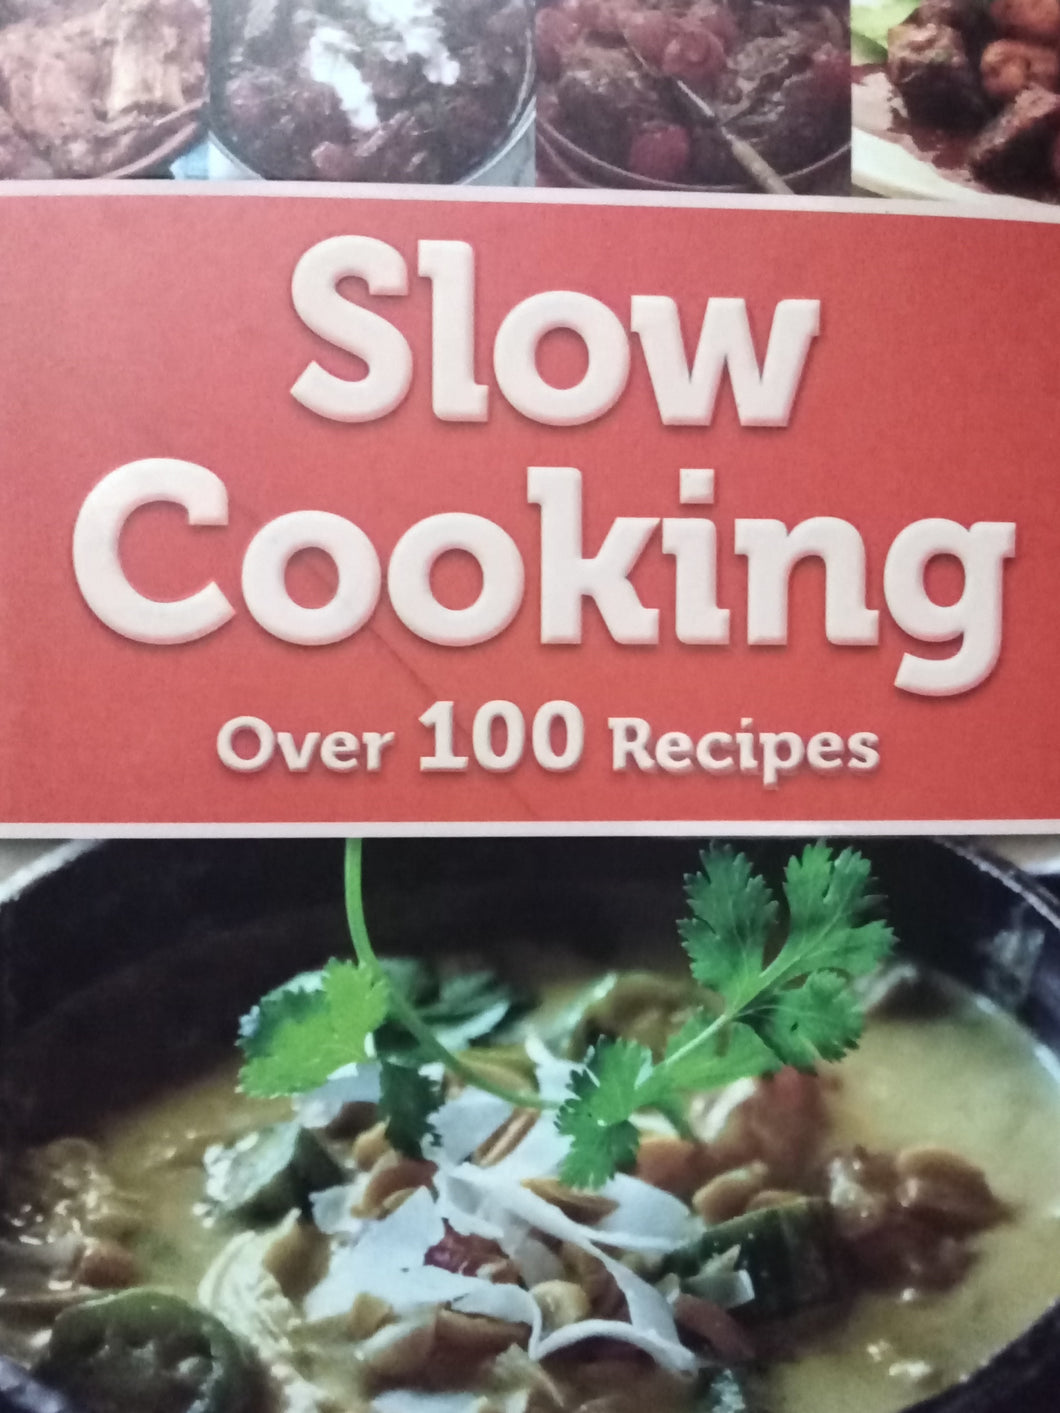 Slow Cooking Over 100 Recipes